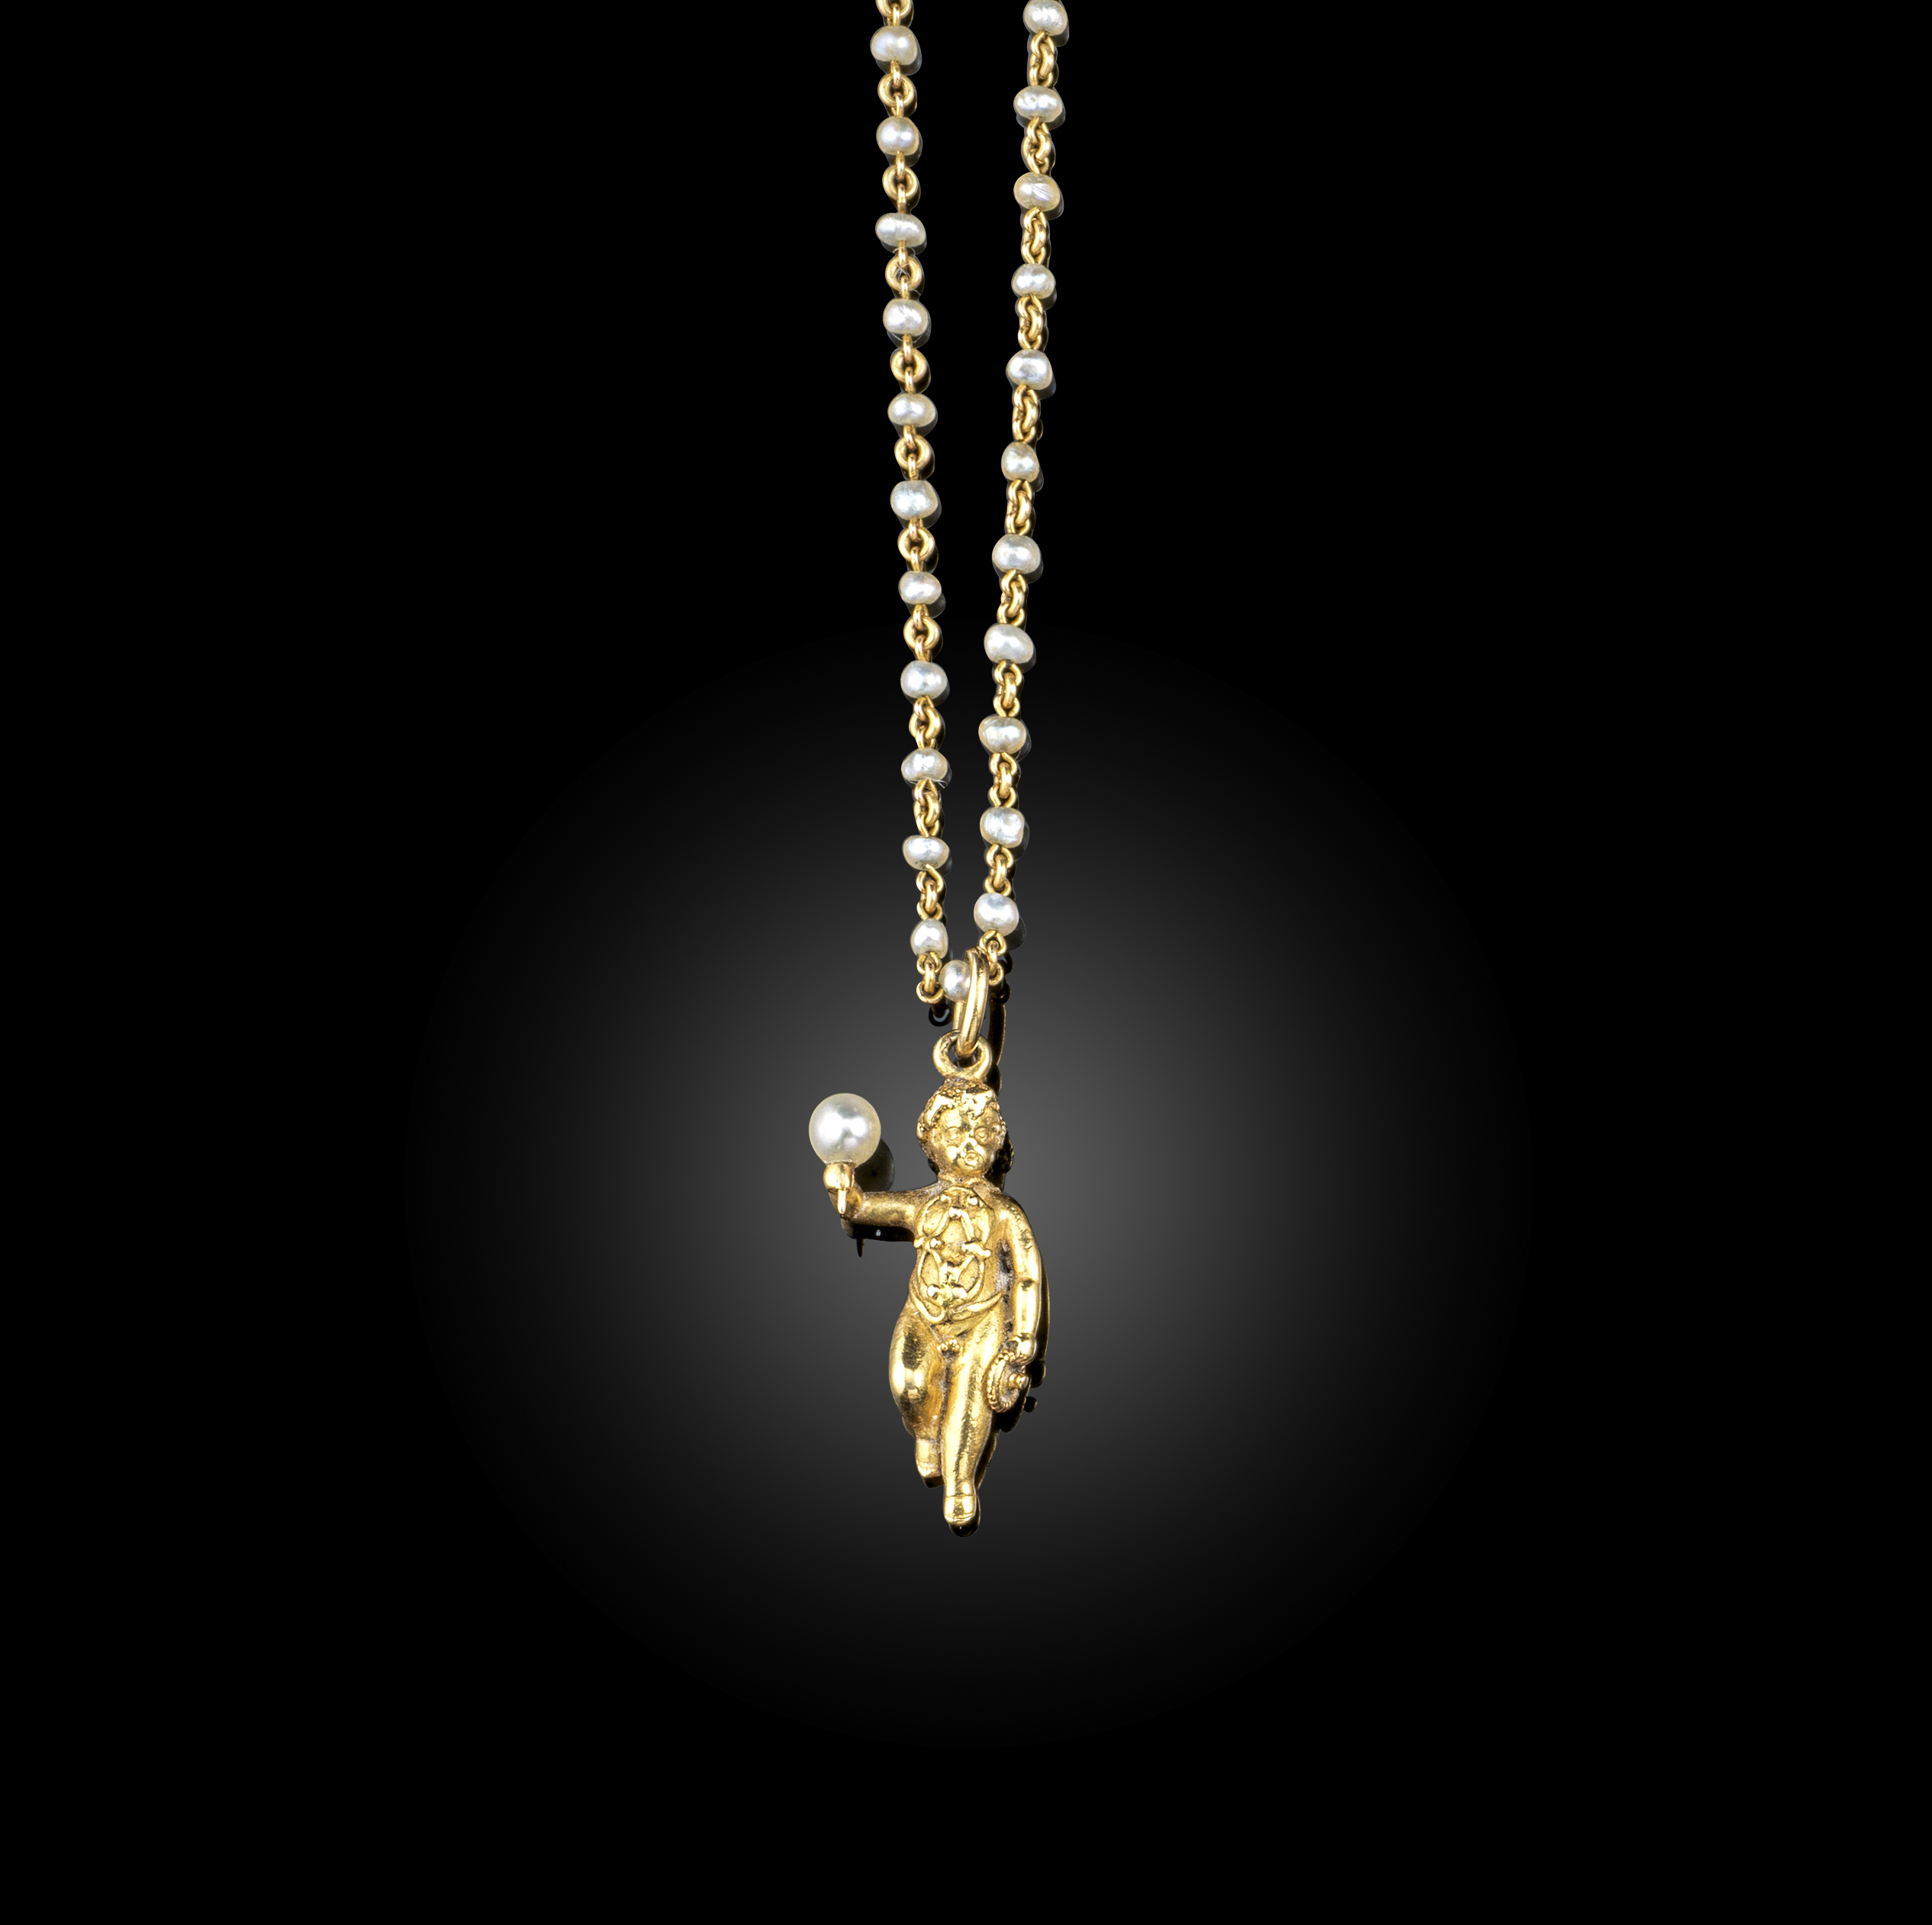 A gold and pearl neckalce, late 19th century, the necklace composed of gold chain linking threaded